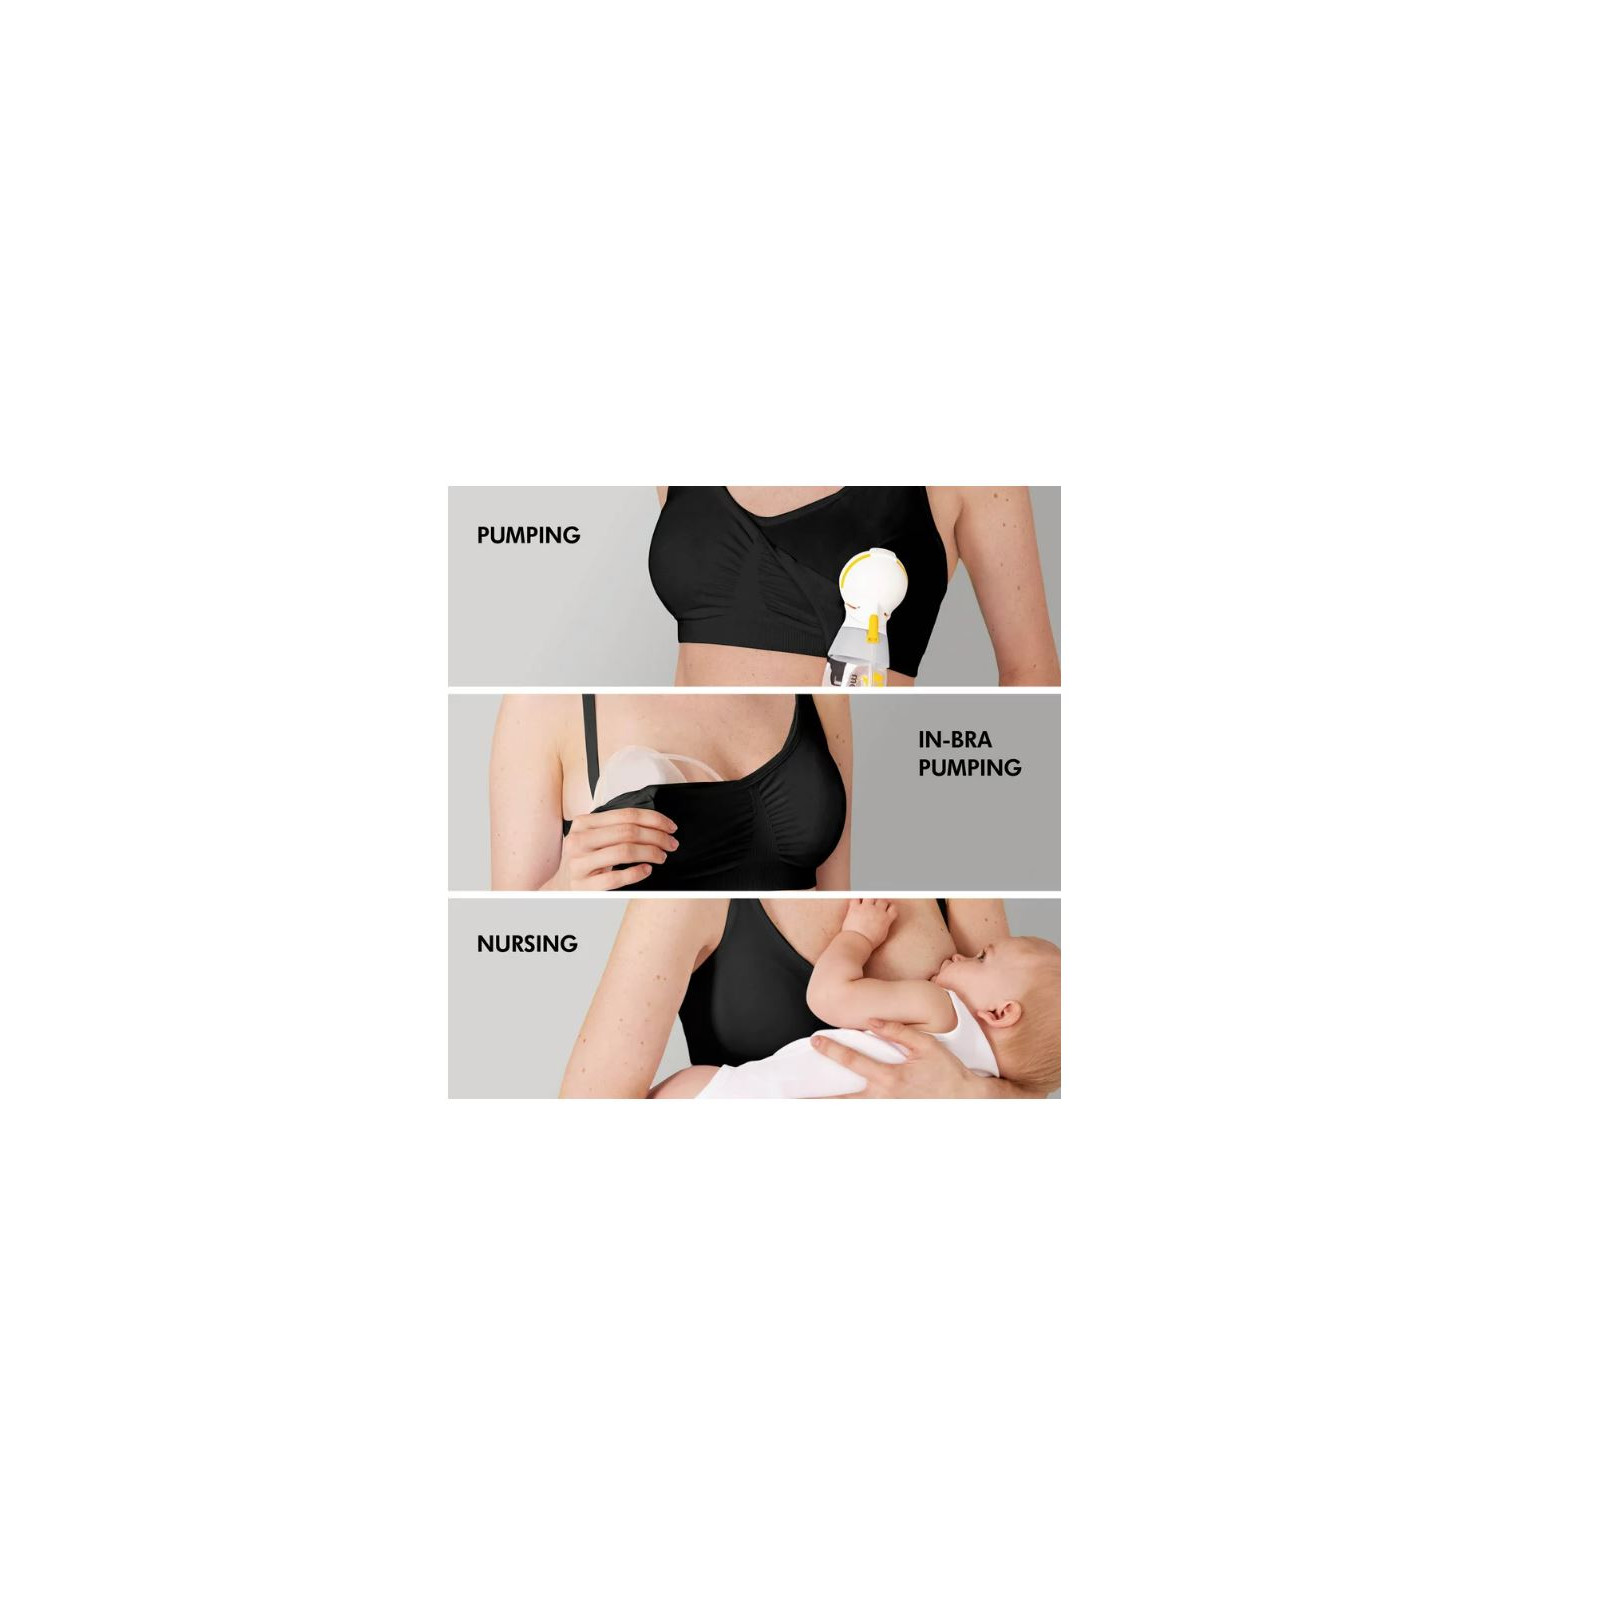 Medela 3 in 1 Nursing and Pumping Bra, Breathable, Lightweight for  Ultimate Comfort when Feeding, Electric Pumping or In-Bra Pumping, Black  Large